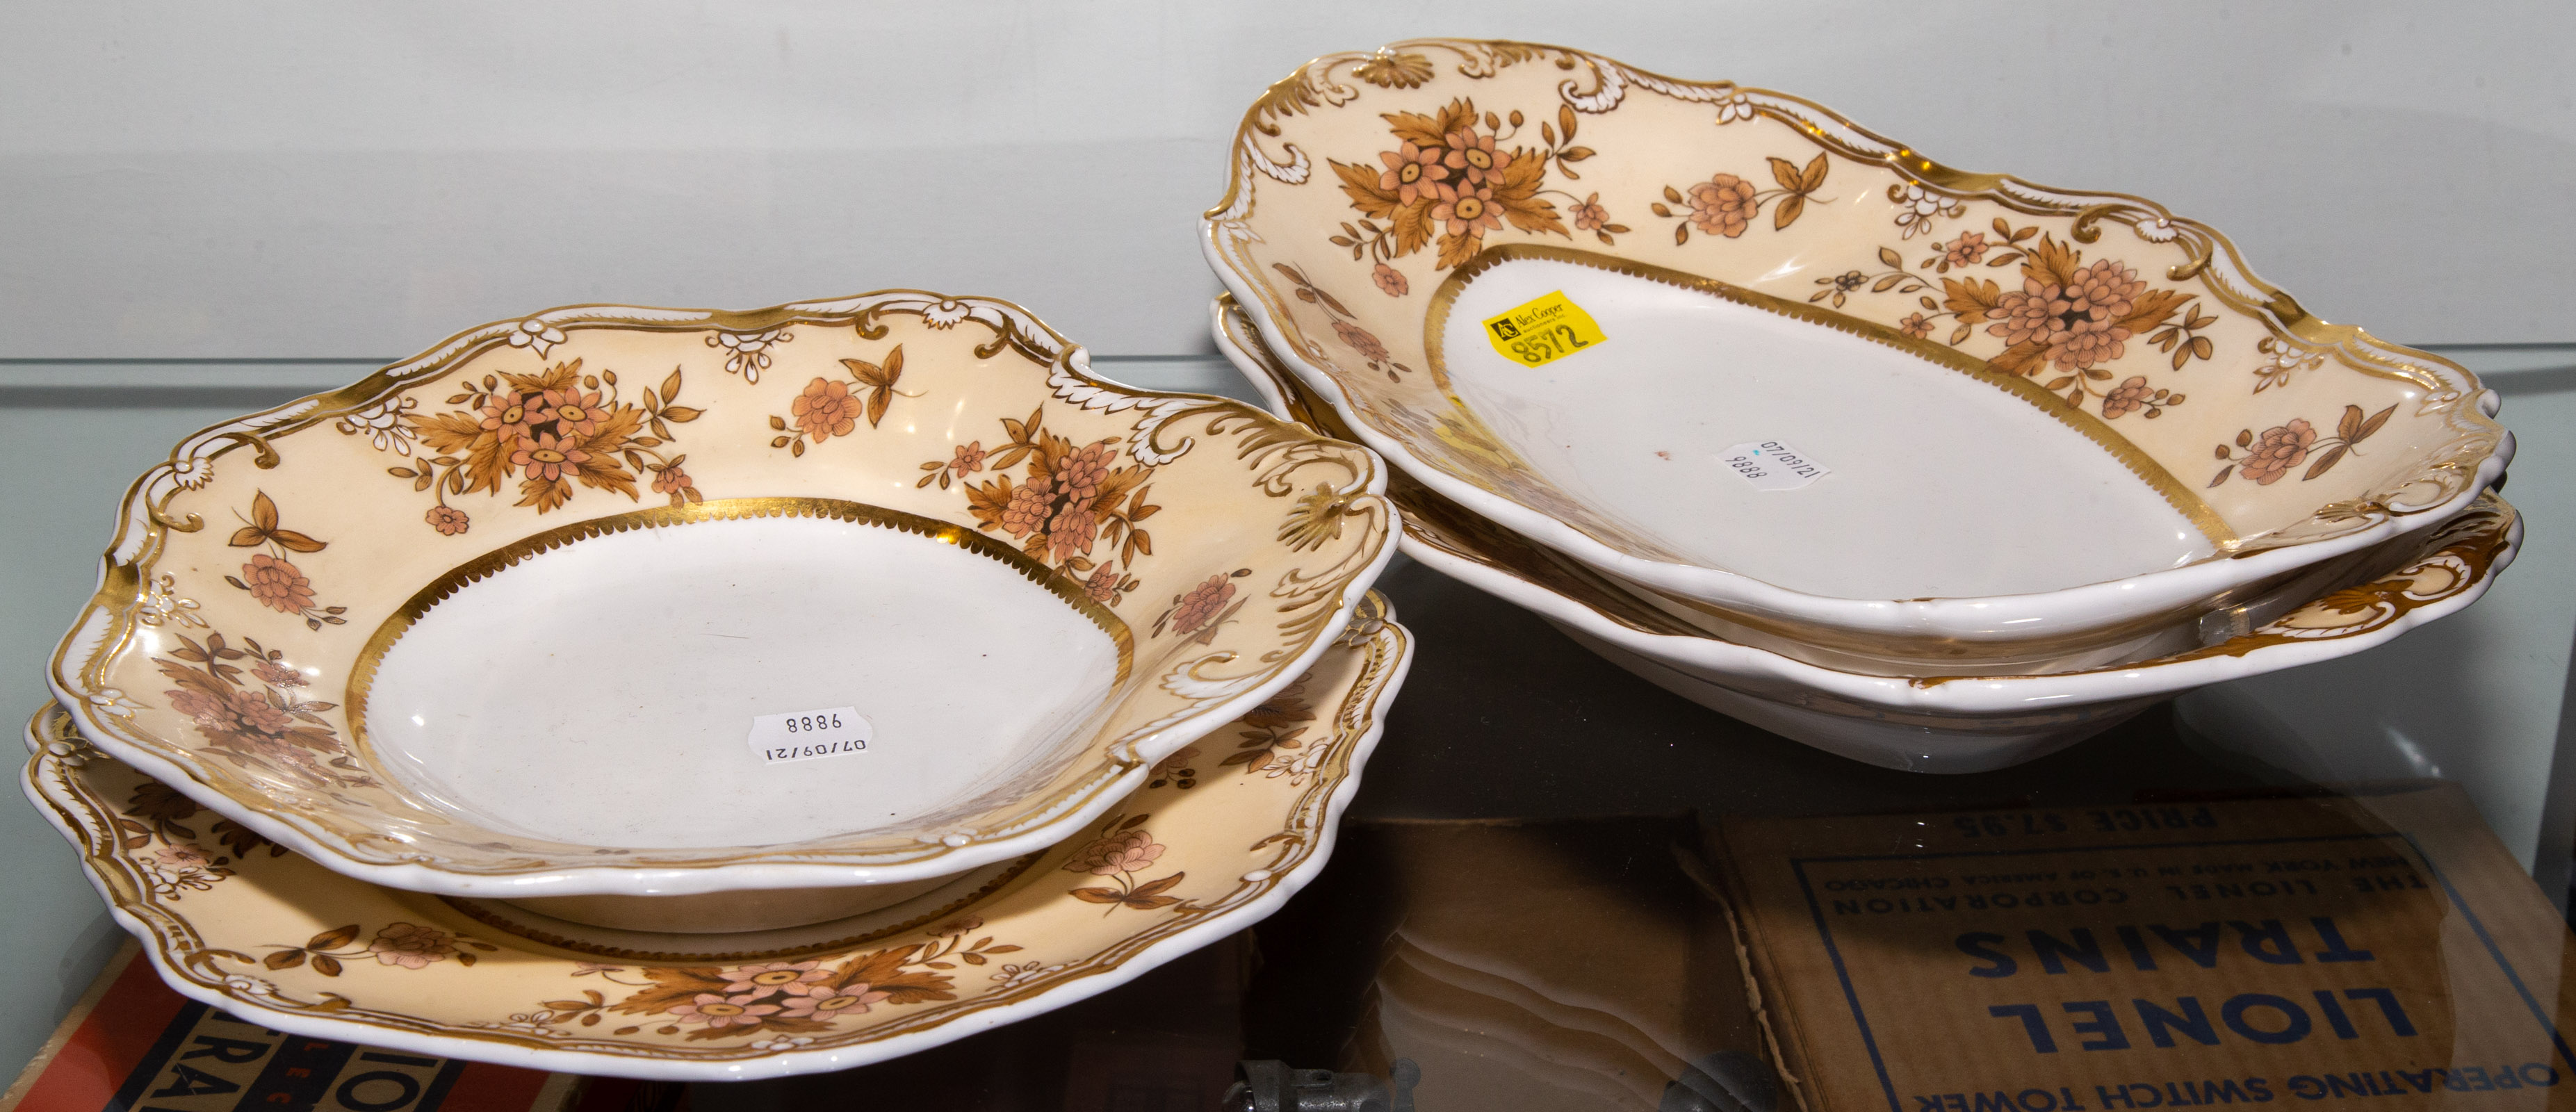 FOUR SPODE CHINA SERVING DISHES